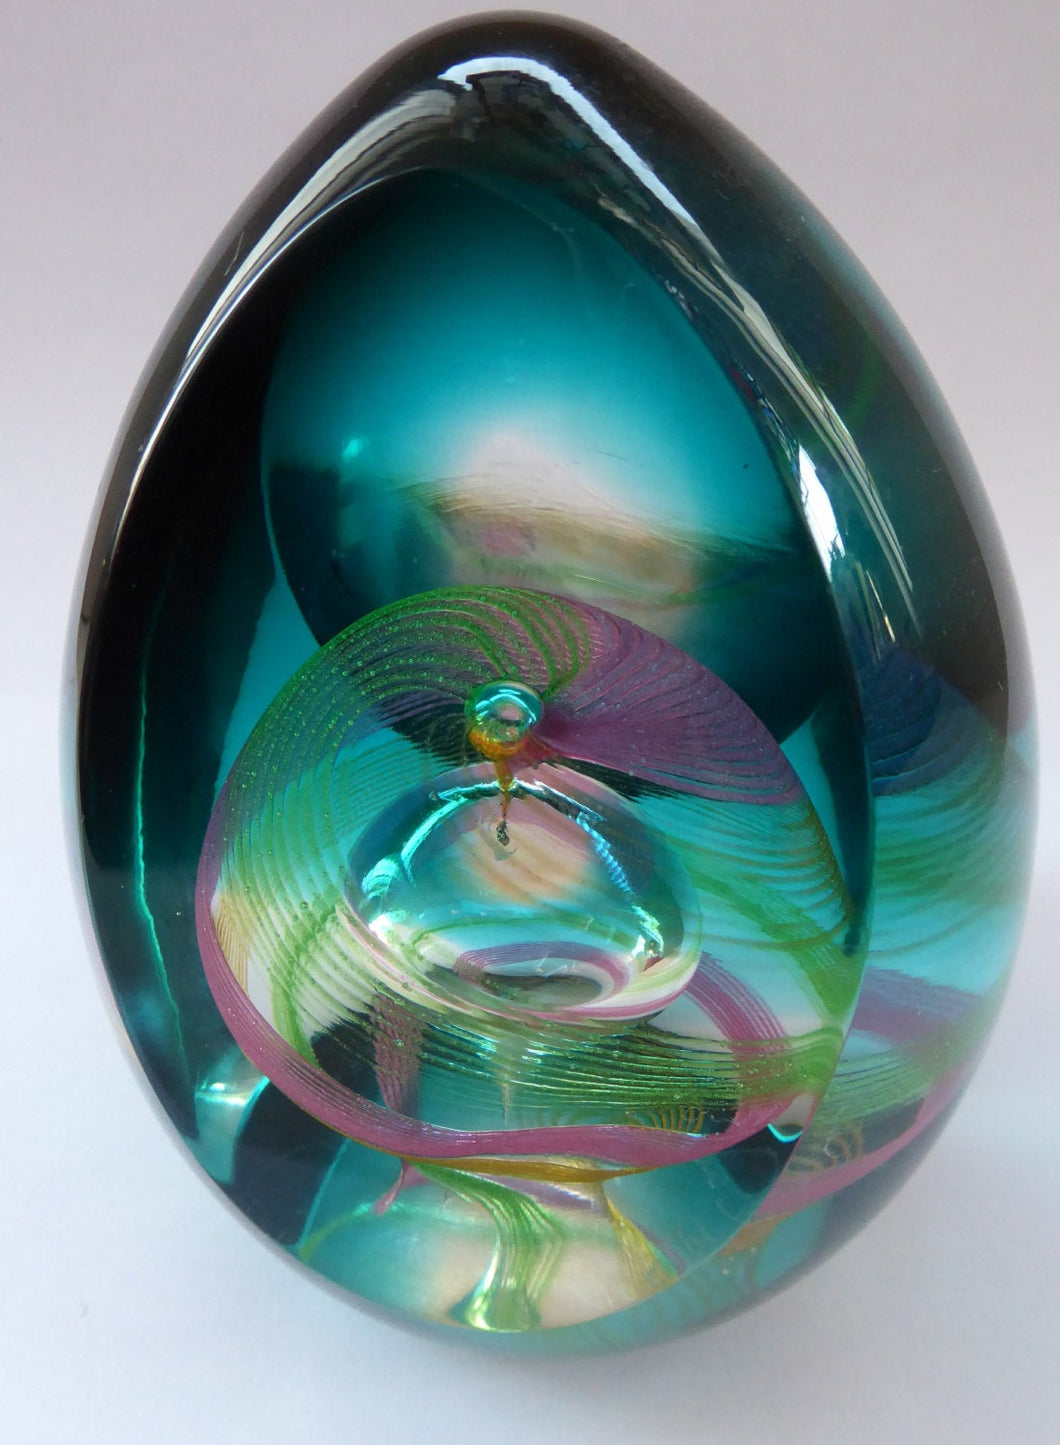 LIMITED EDITION Vintage 1992 Caithness Paperweight: MEDITATION by Margot Thomson